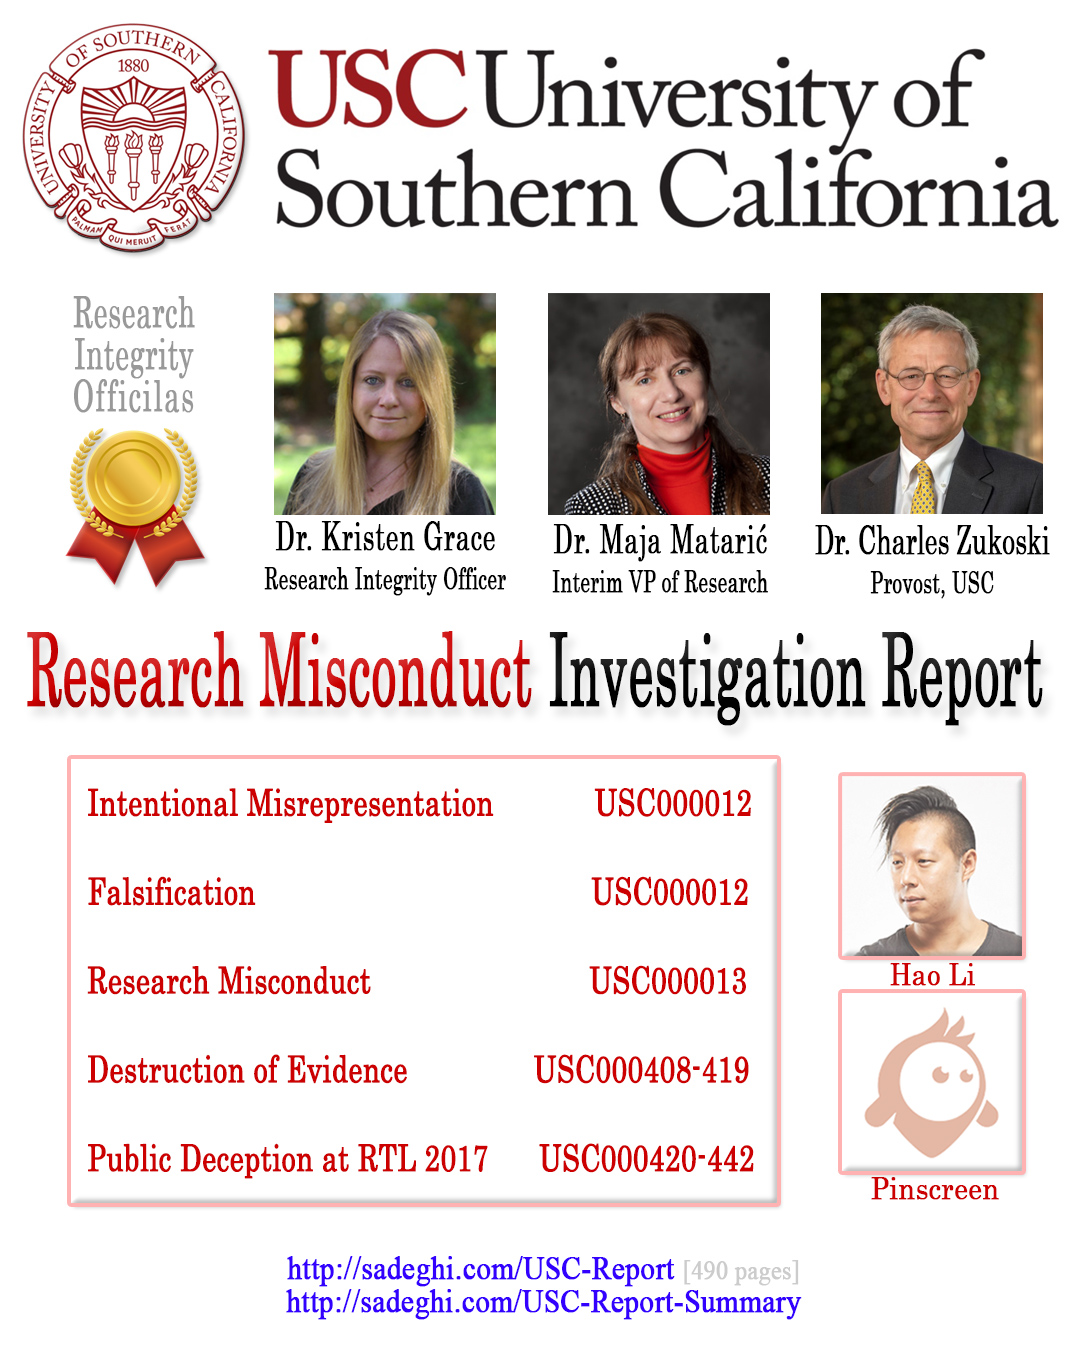 USC's Investigation Report re Hao Li's and Pinscreen's Scientific Misconduct at ACM SIGGRAPH RTL 2017